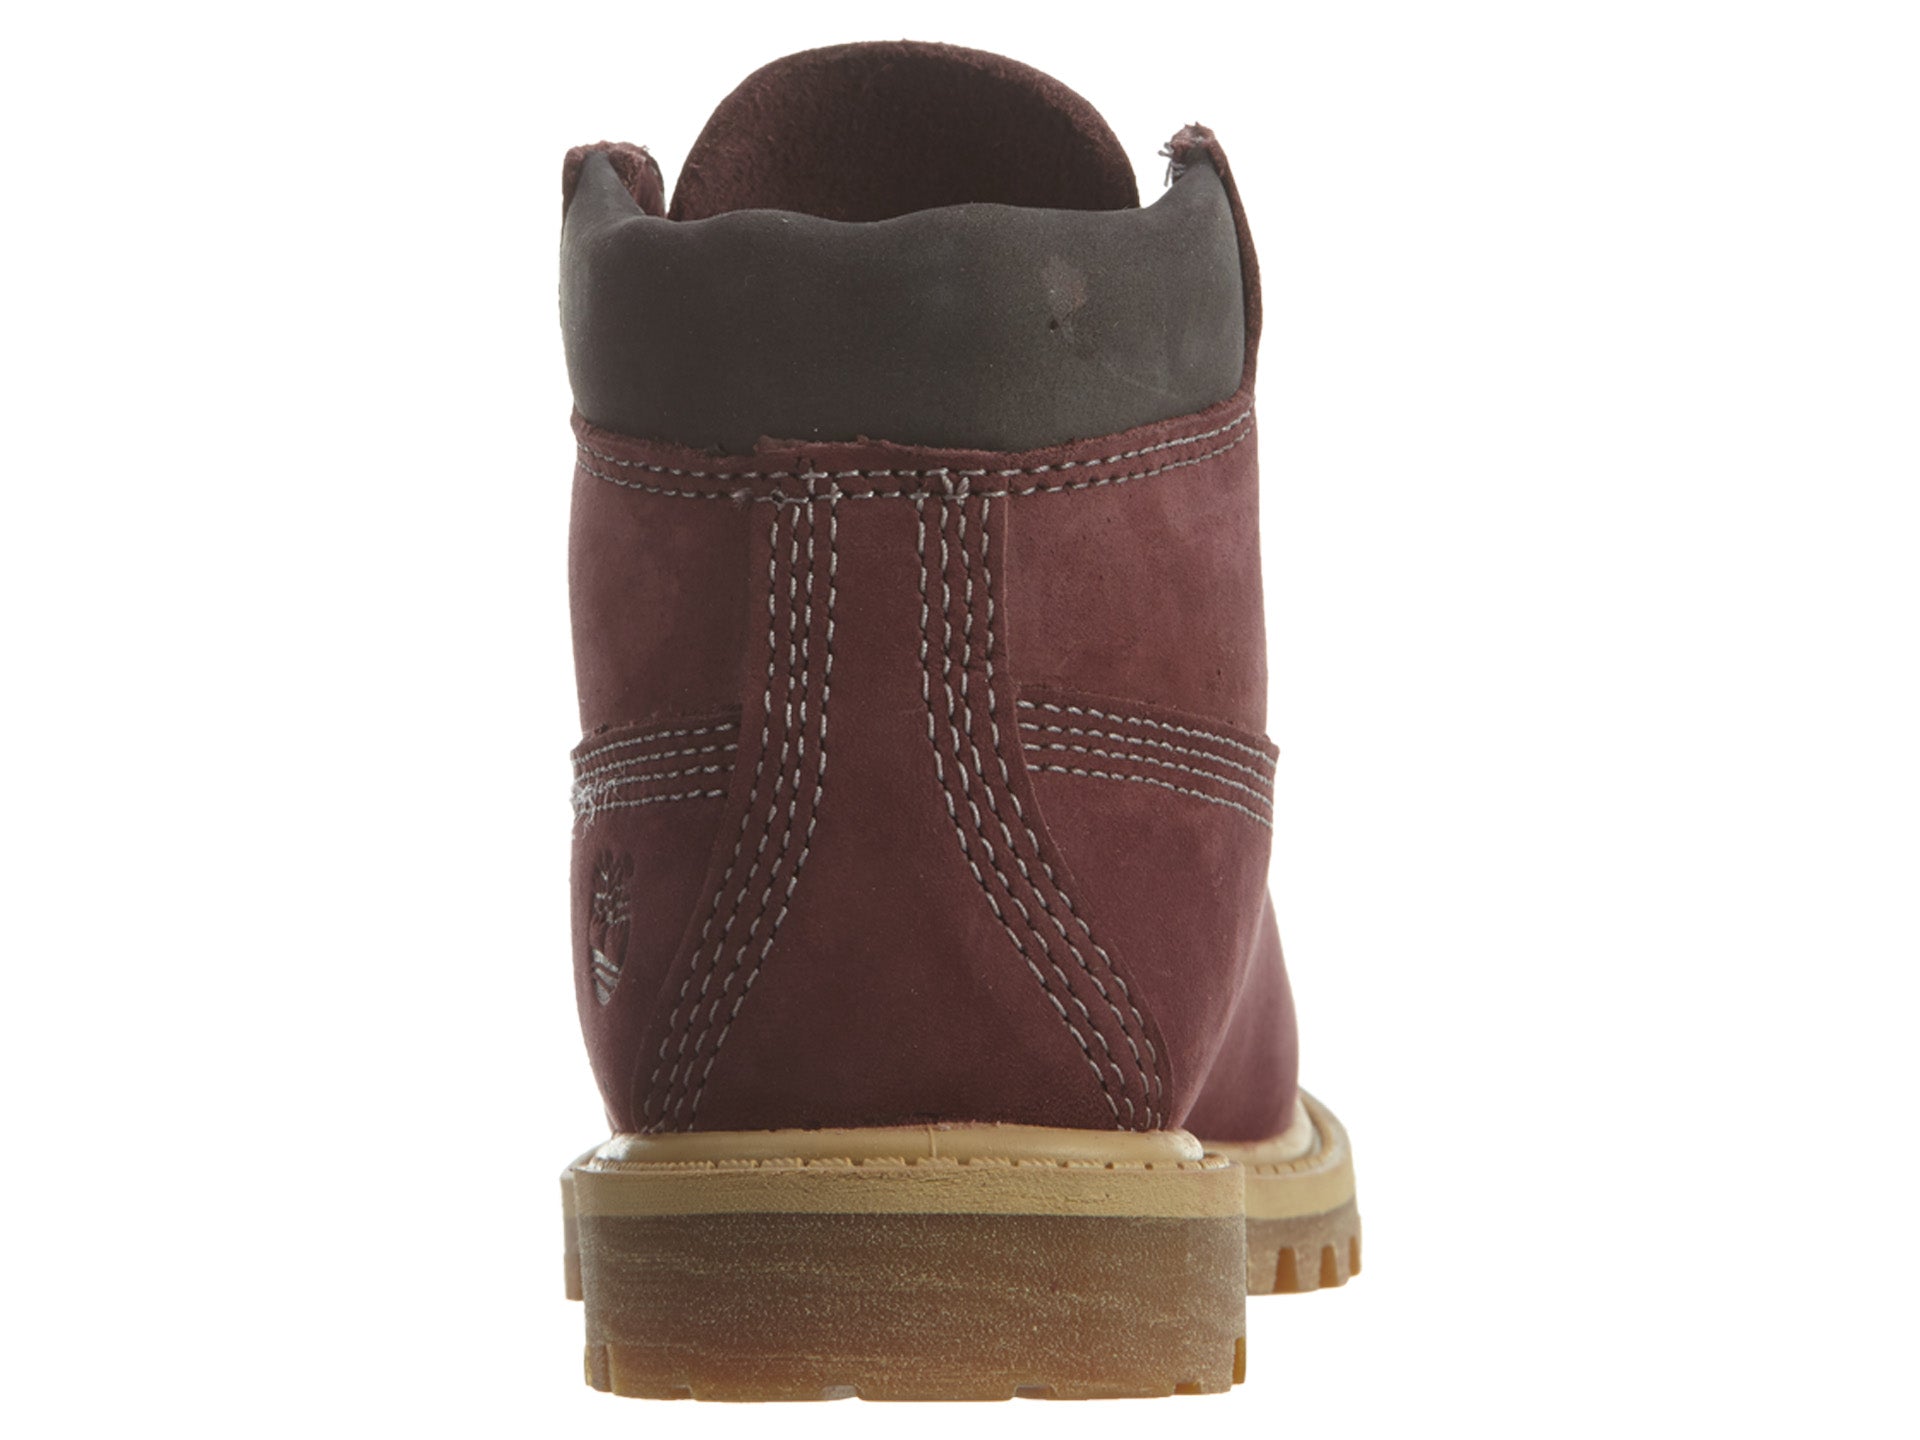 Timberland 6" Premium Boot Toddlers Style : Tb0a1bcx